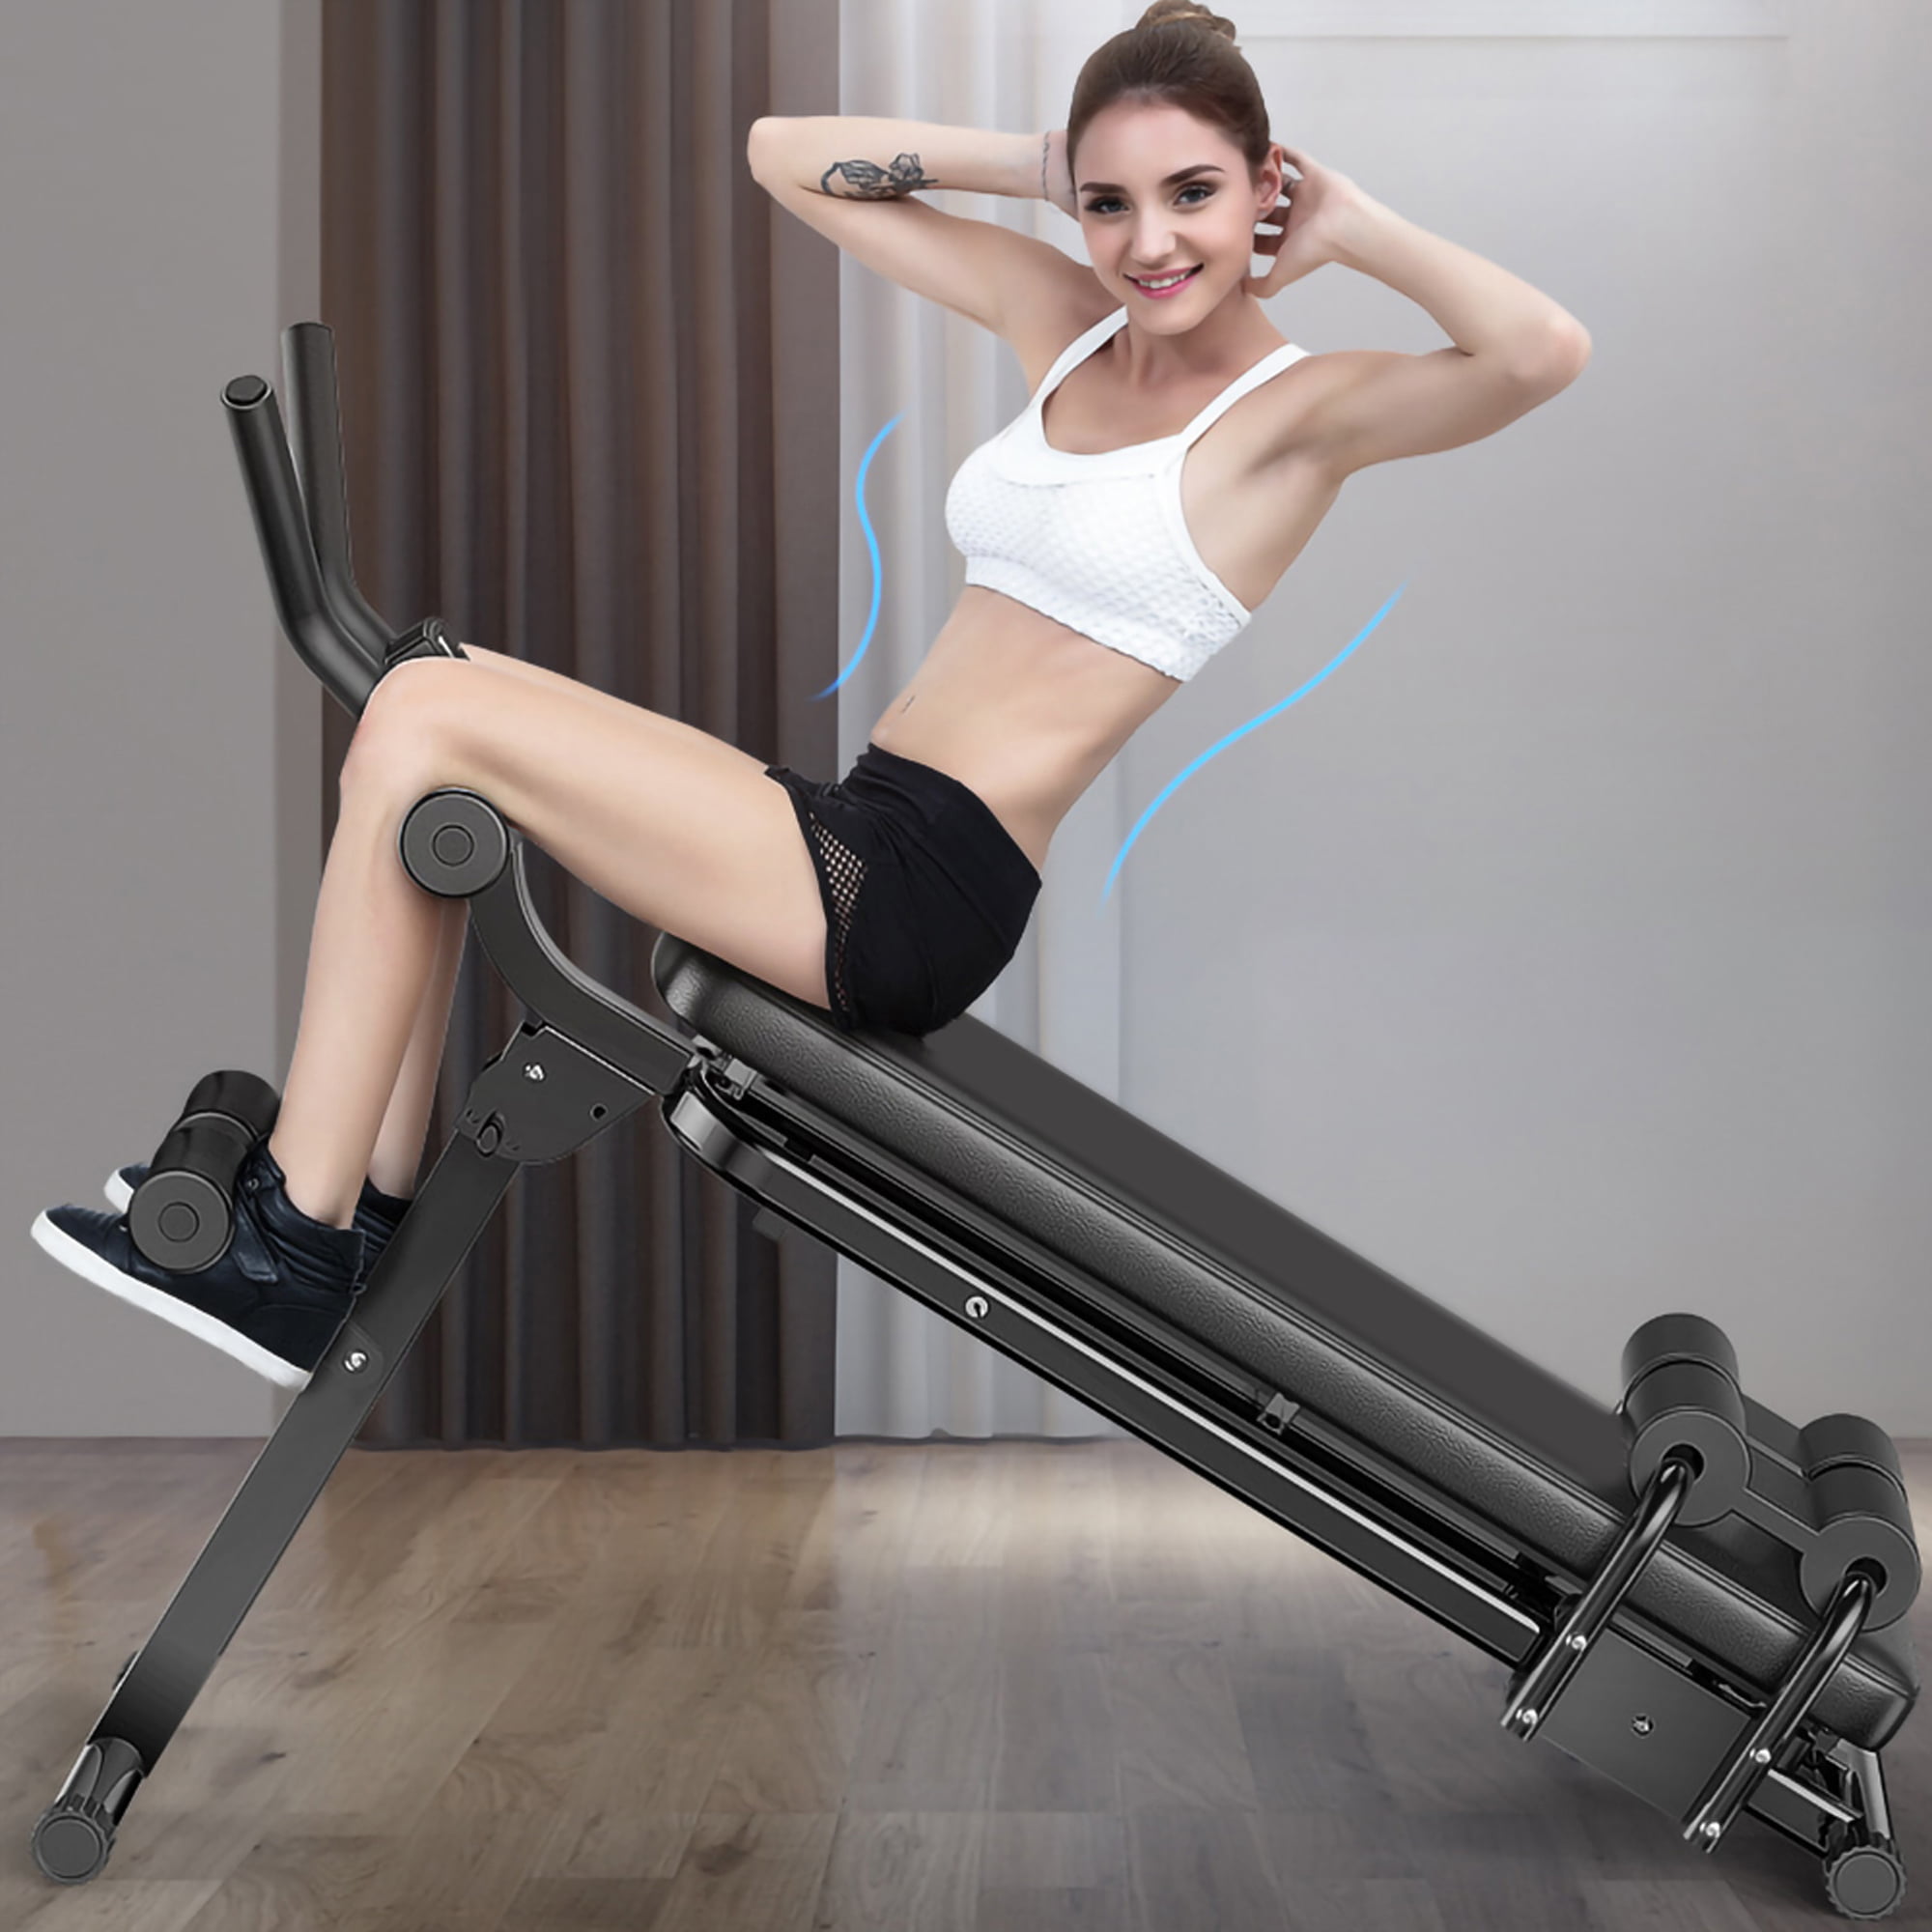 Folding Adjustable Abs Sit Up Crunch Bench Decline Fitness Home Gym Workout New 